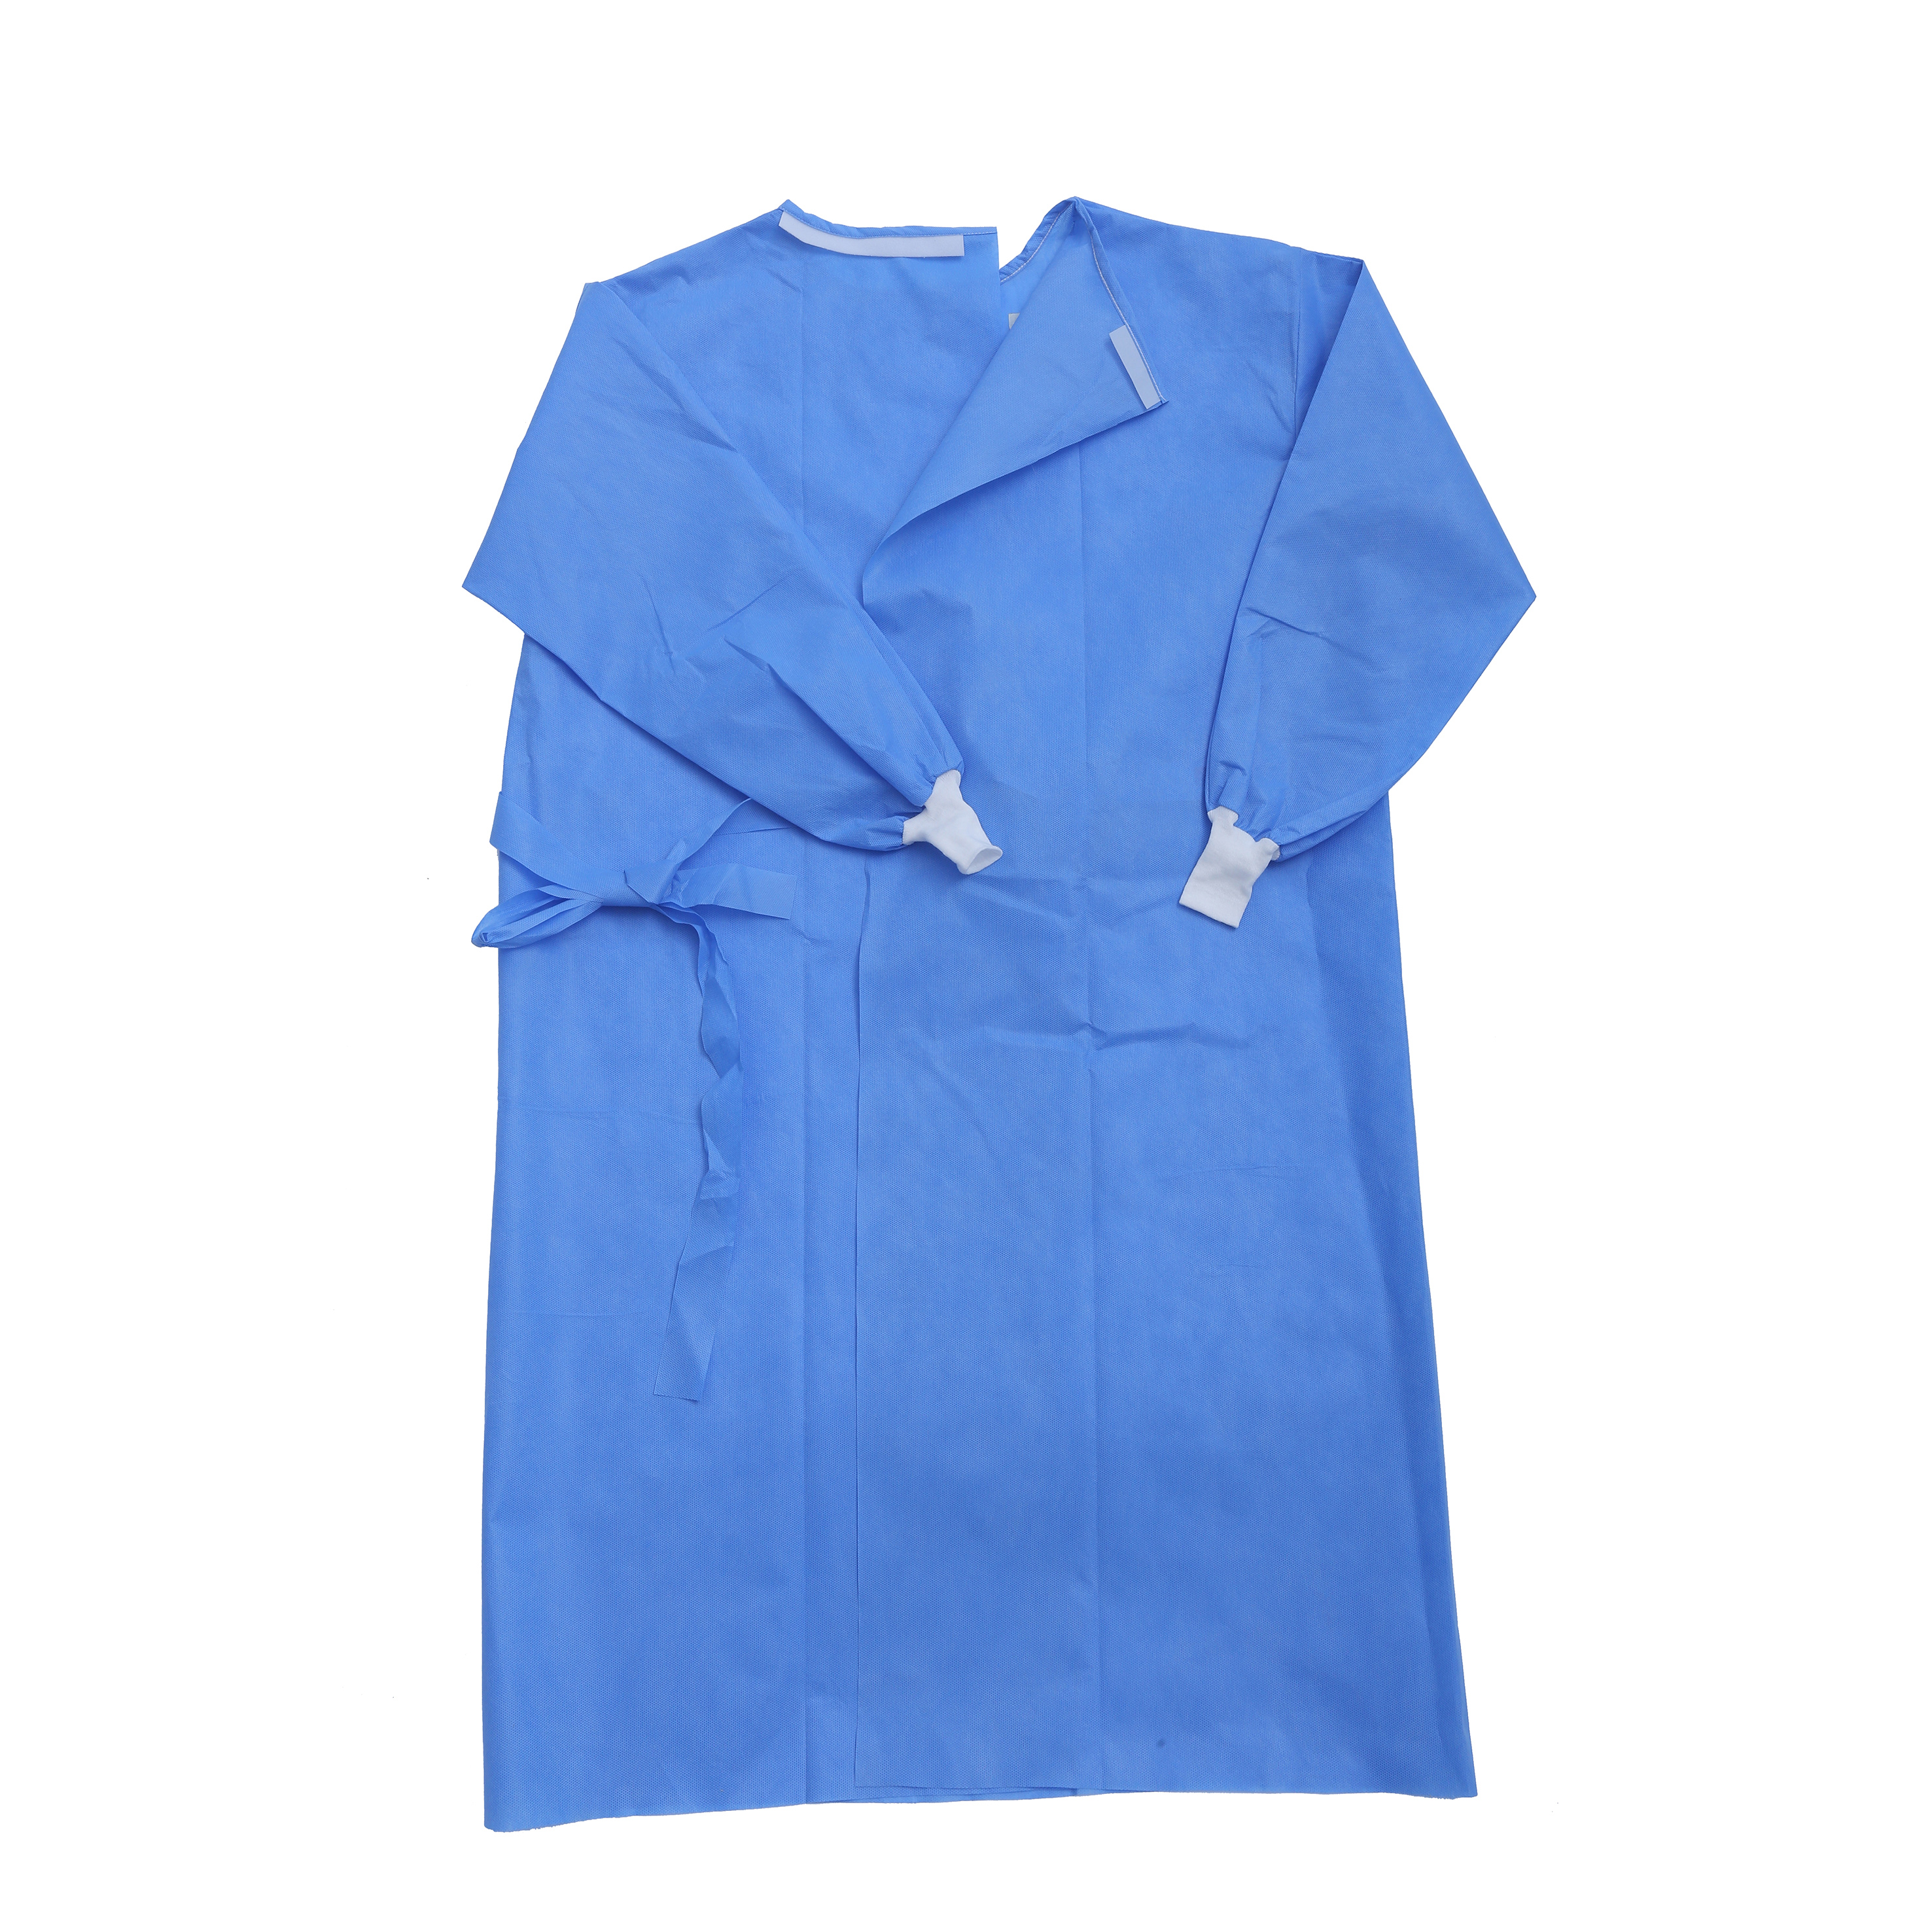 OEM Manufacturer Productos de bazar - Hot Selling Disposable Isolation Gown Medical SMS Disposable Surgical Gown for Hospital – Sellers Union